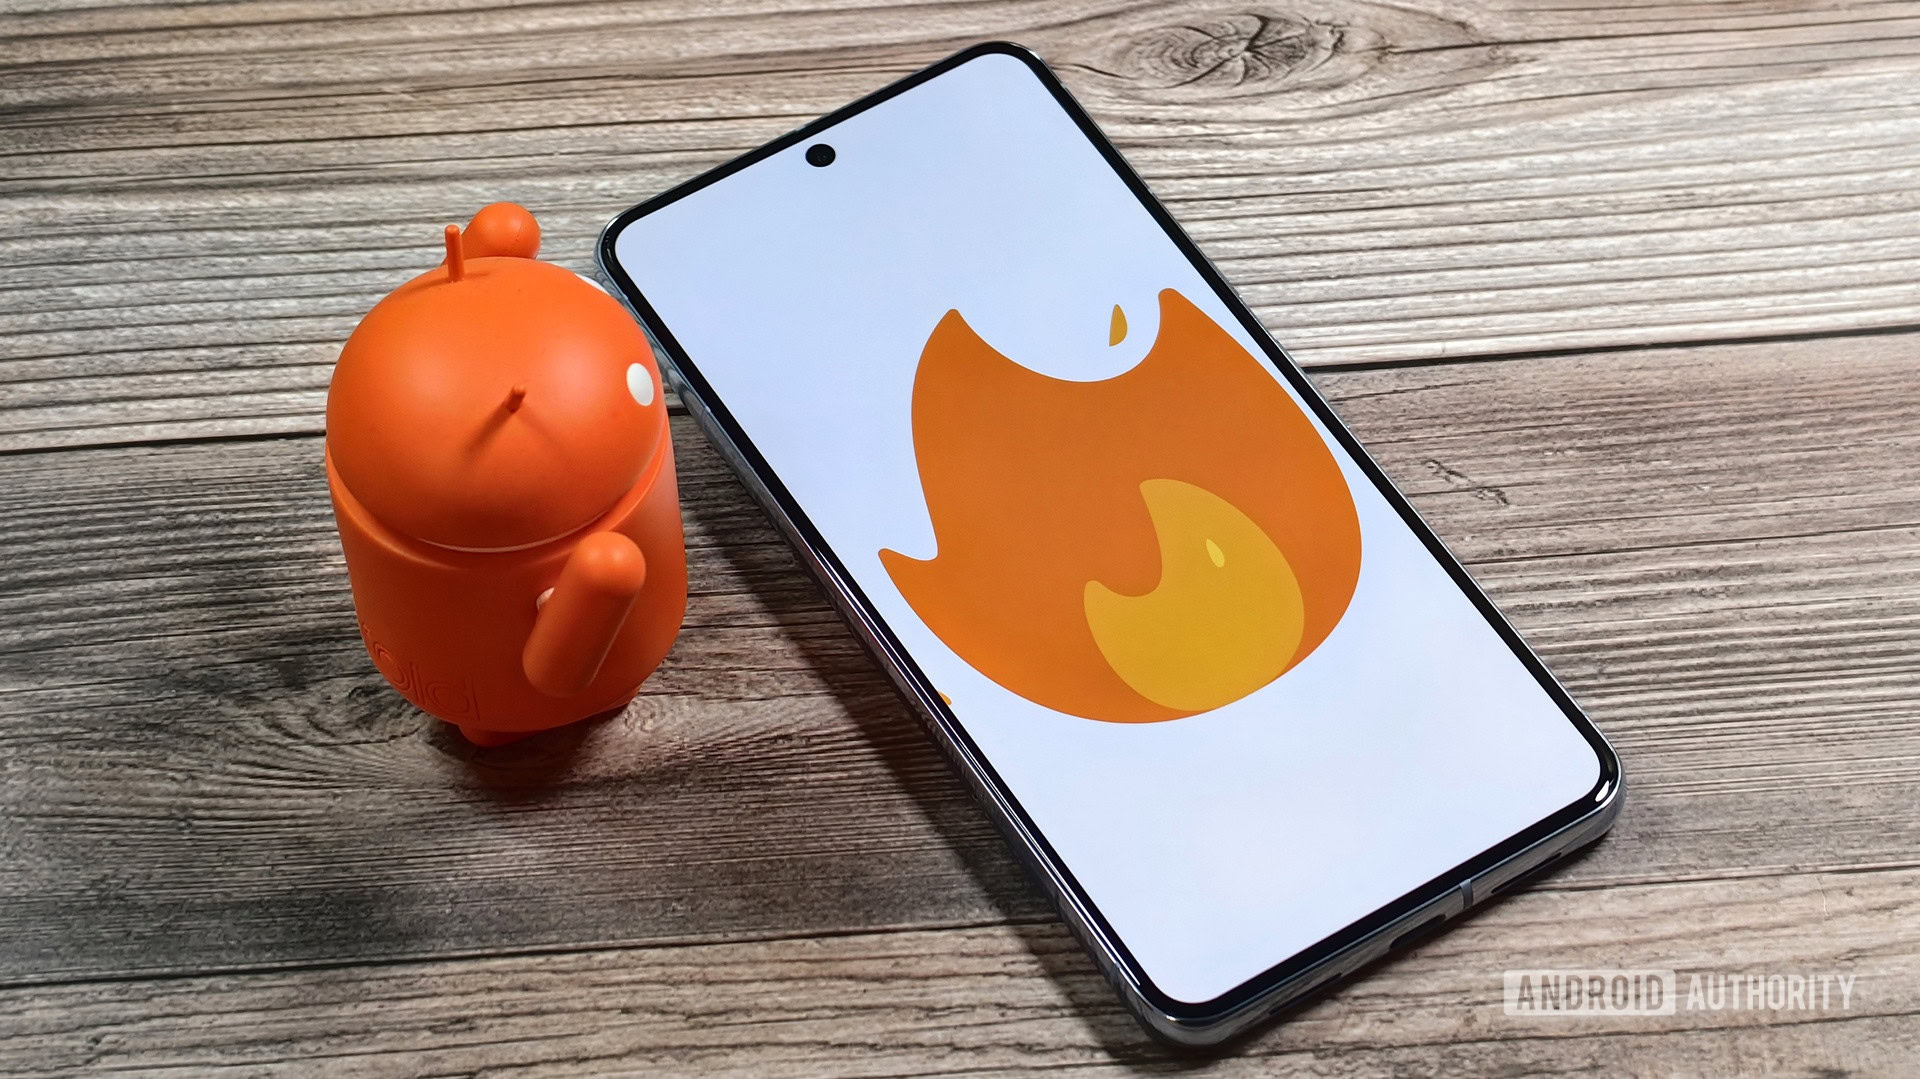 Upcoming ‘Adaptive Thermal’ feature for Pixels will teach you to prevent overheating (APK teardown)